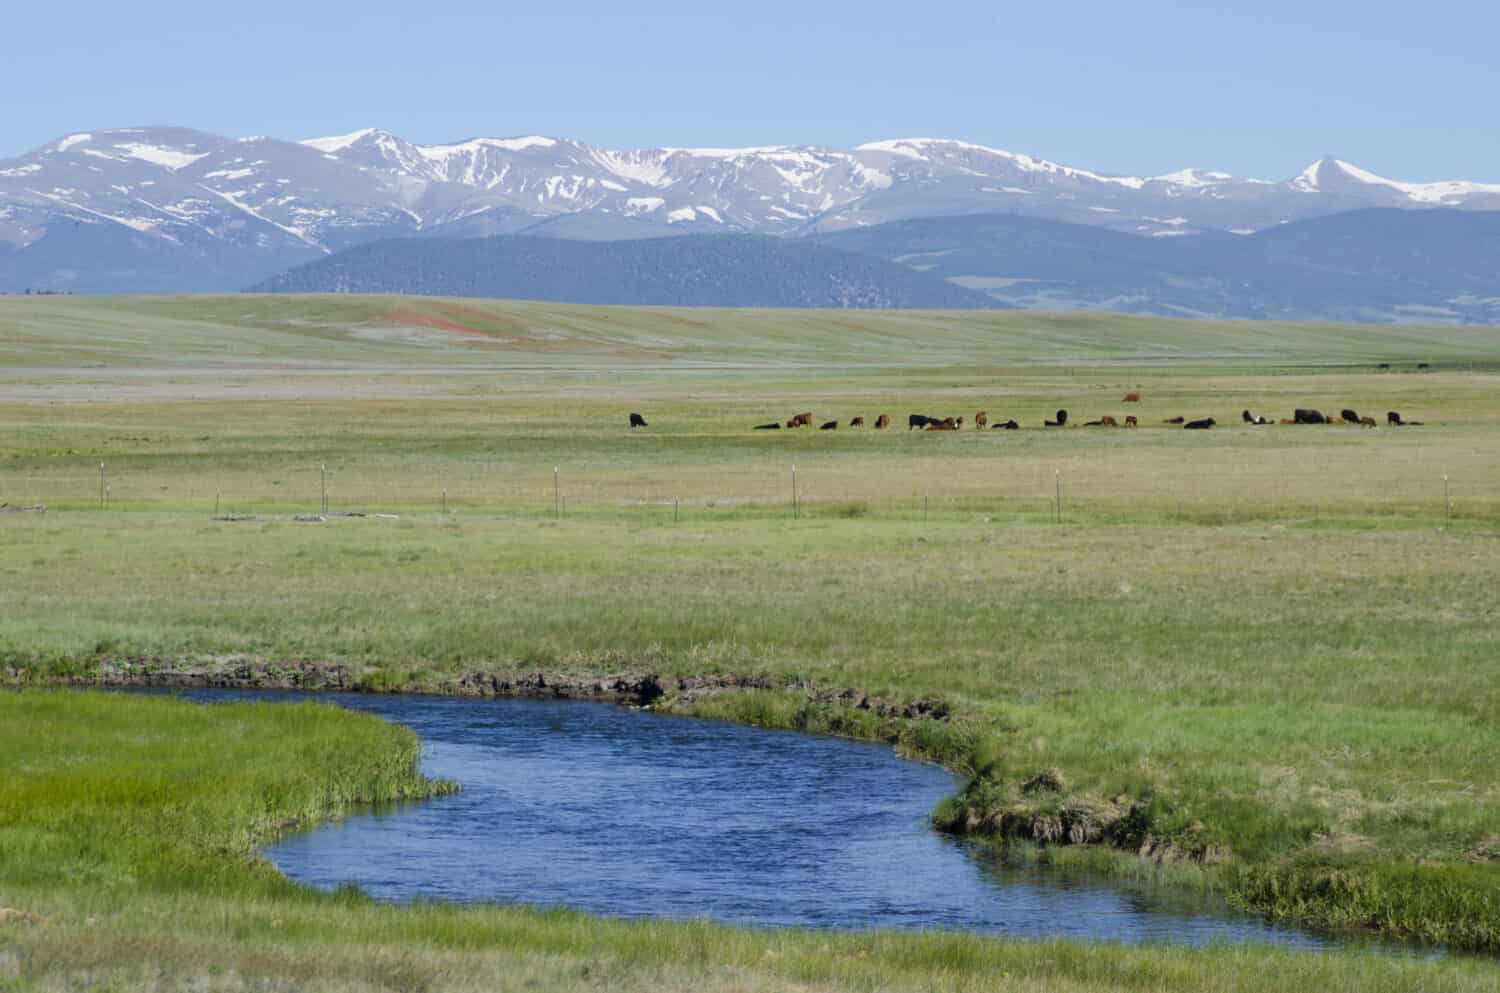 A small herd of cattle graze in the scenic landscape of South Park, Colorado with the Mosquito Range of mountains in the background and the South Platte River meandering through the foreground.